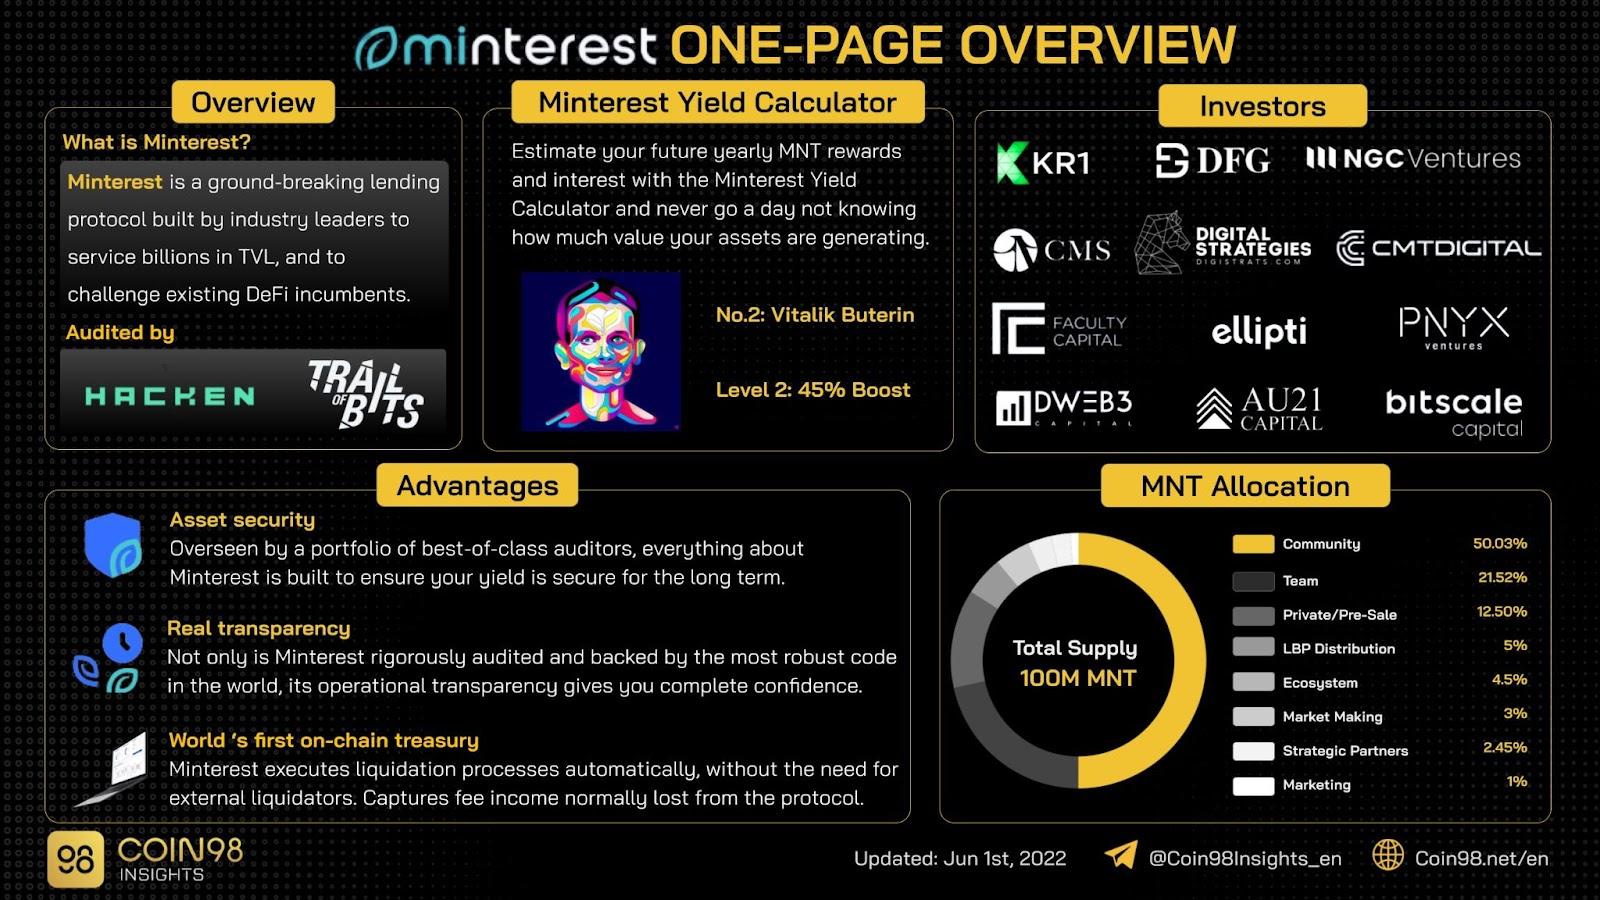 minterest onepage overview